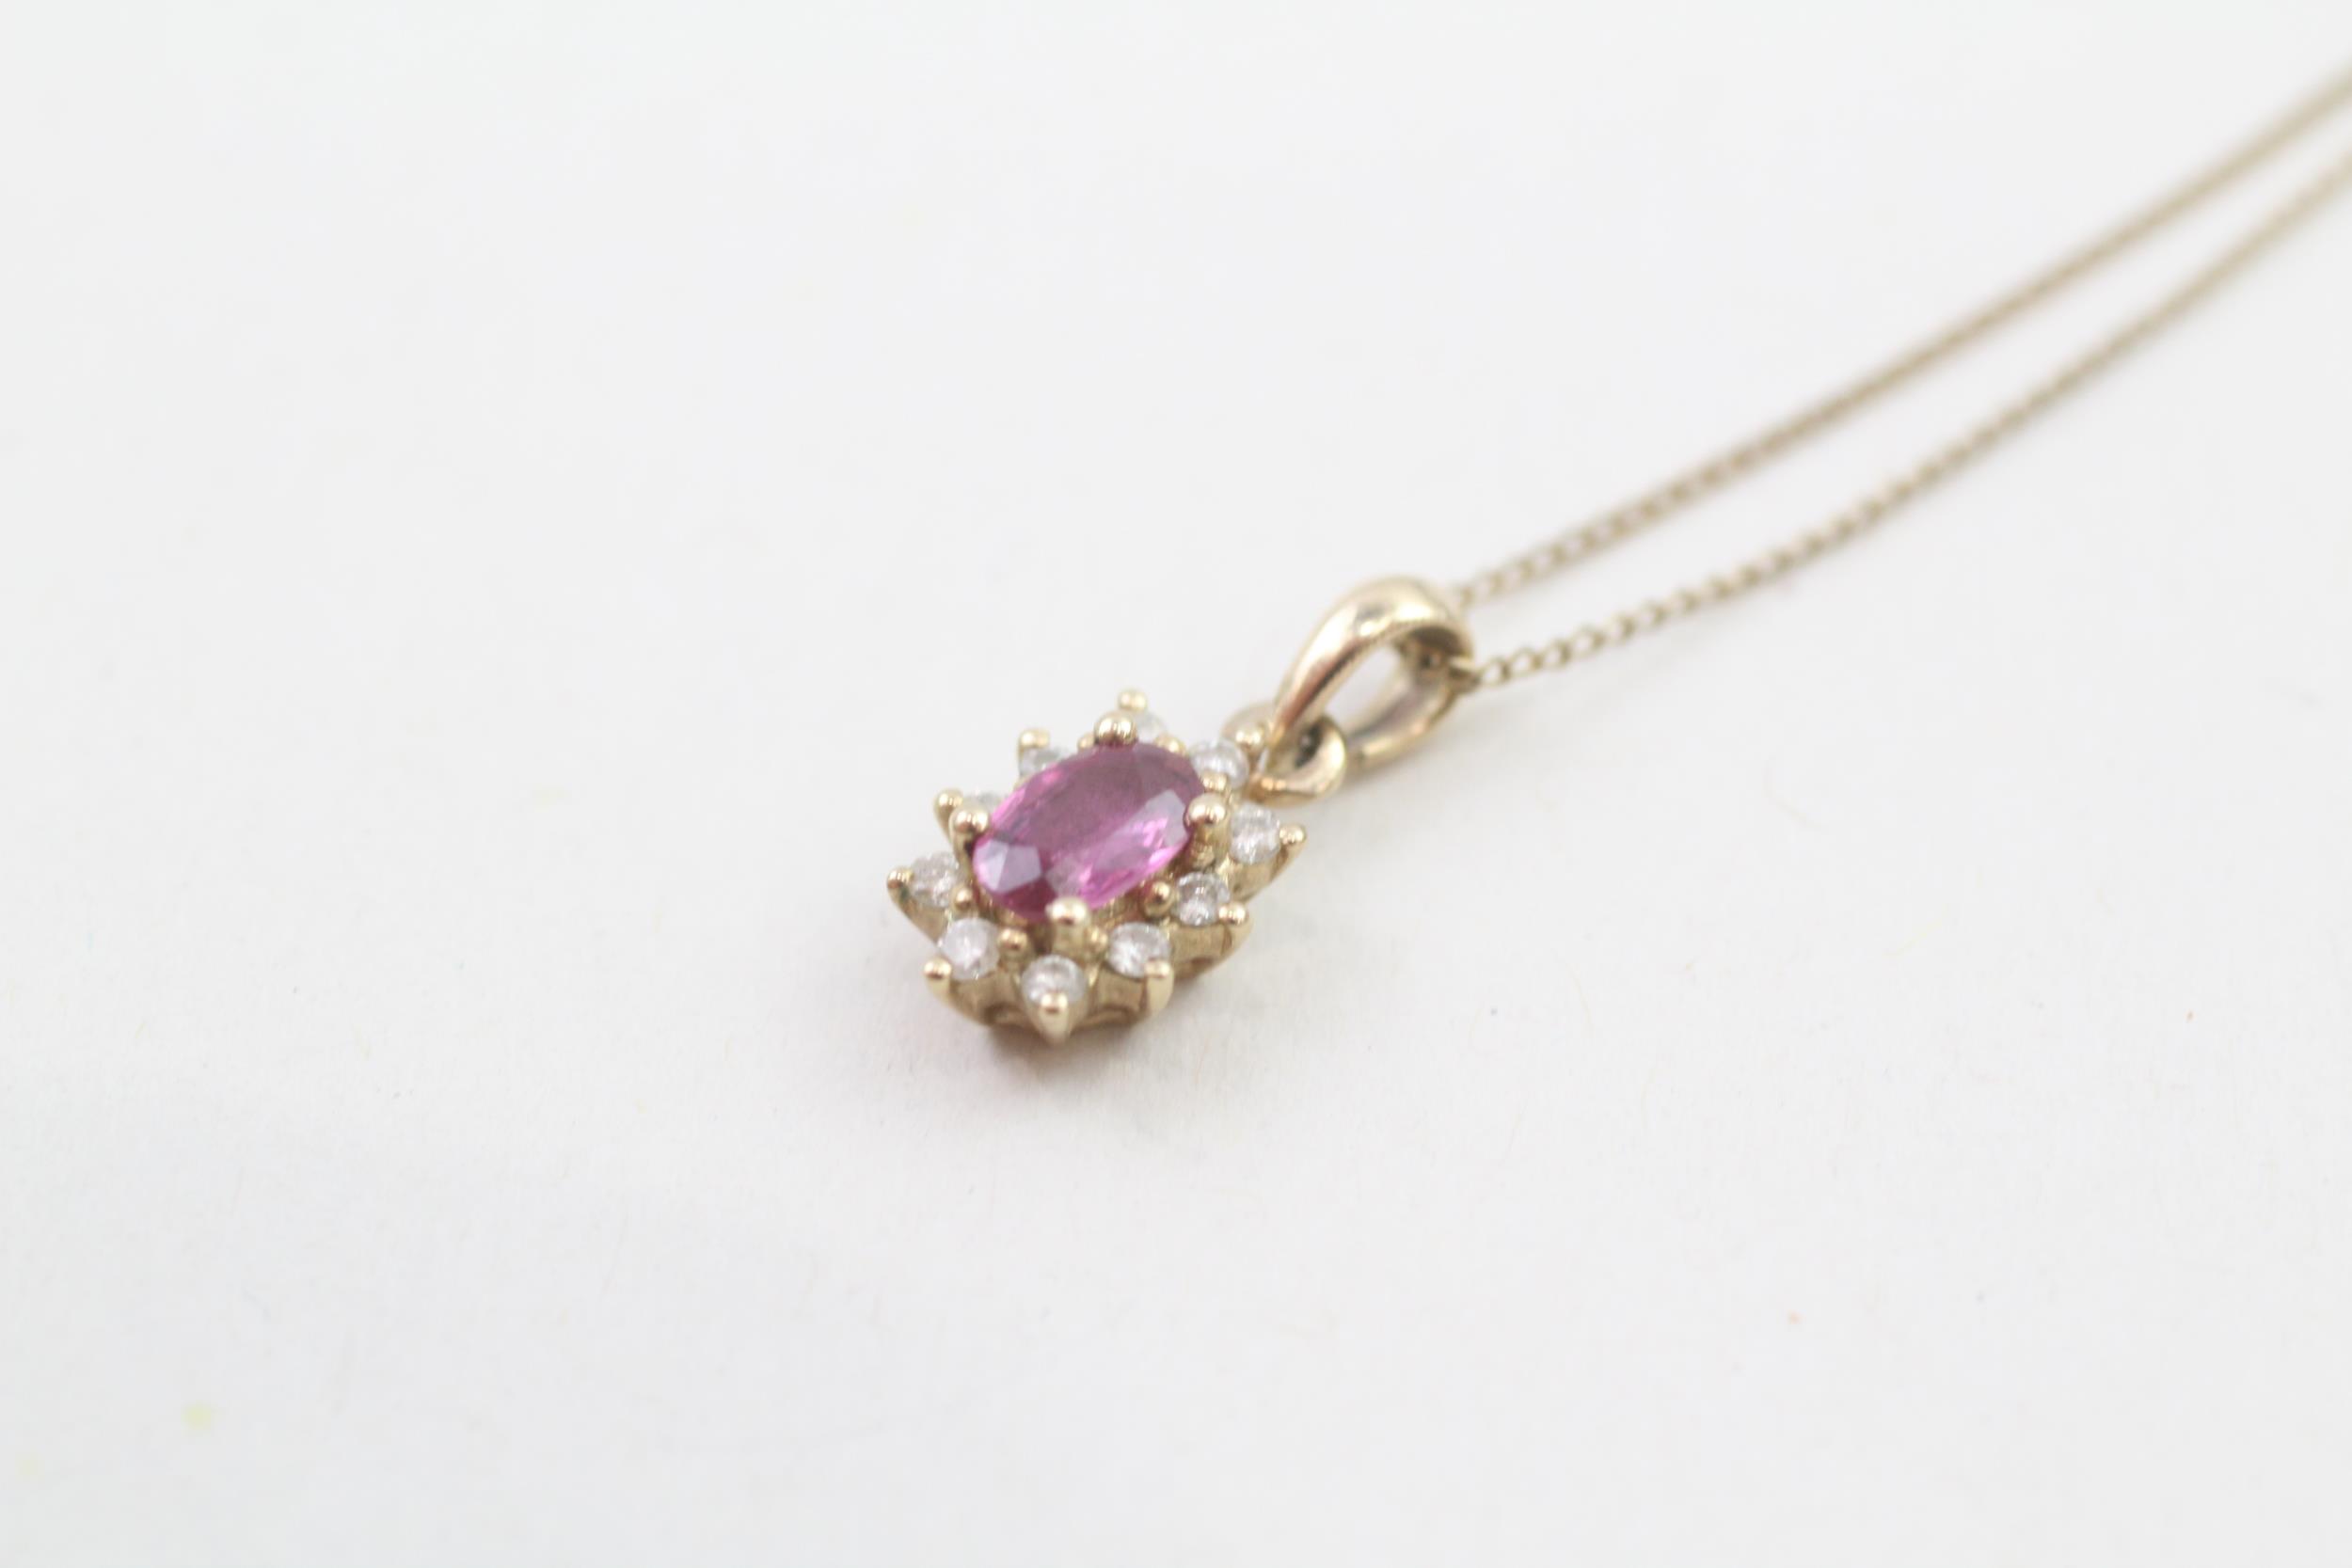 9ct gold ruby & diamond pendant necklace (1.1g) - Image 2 of 4